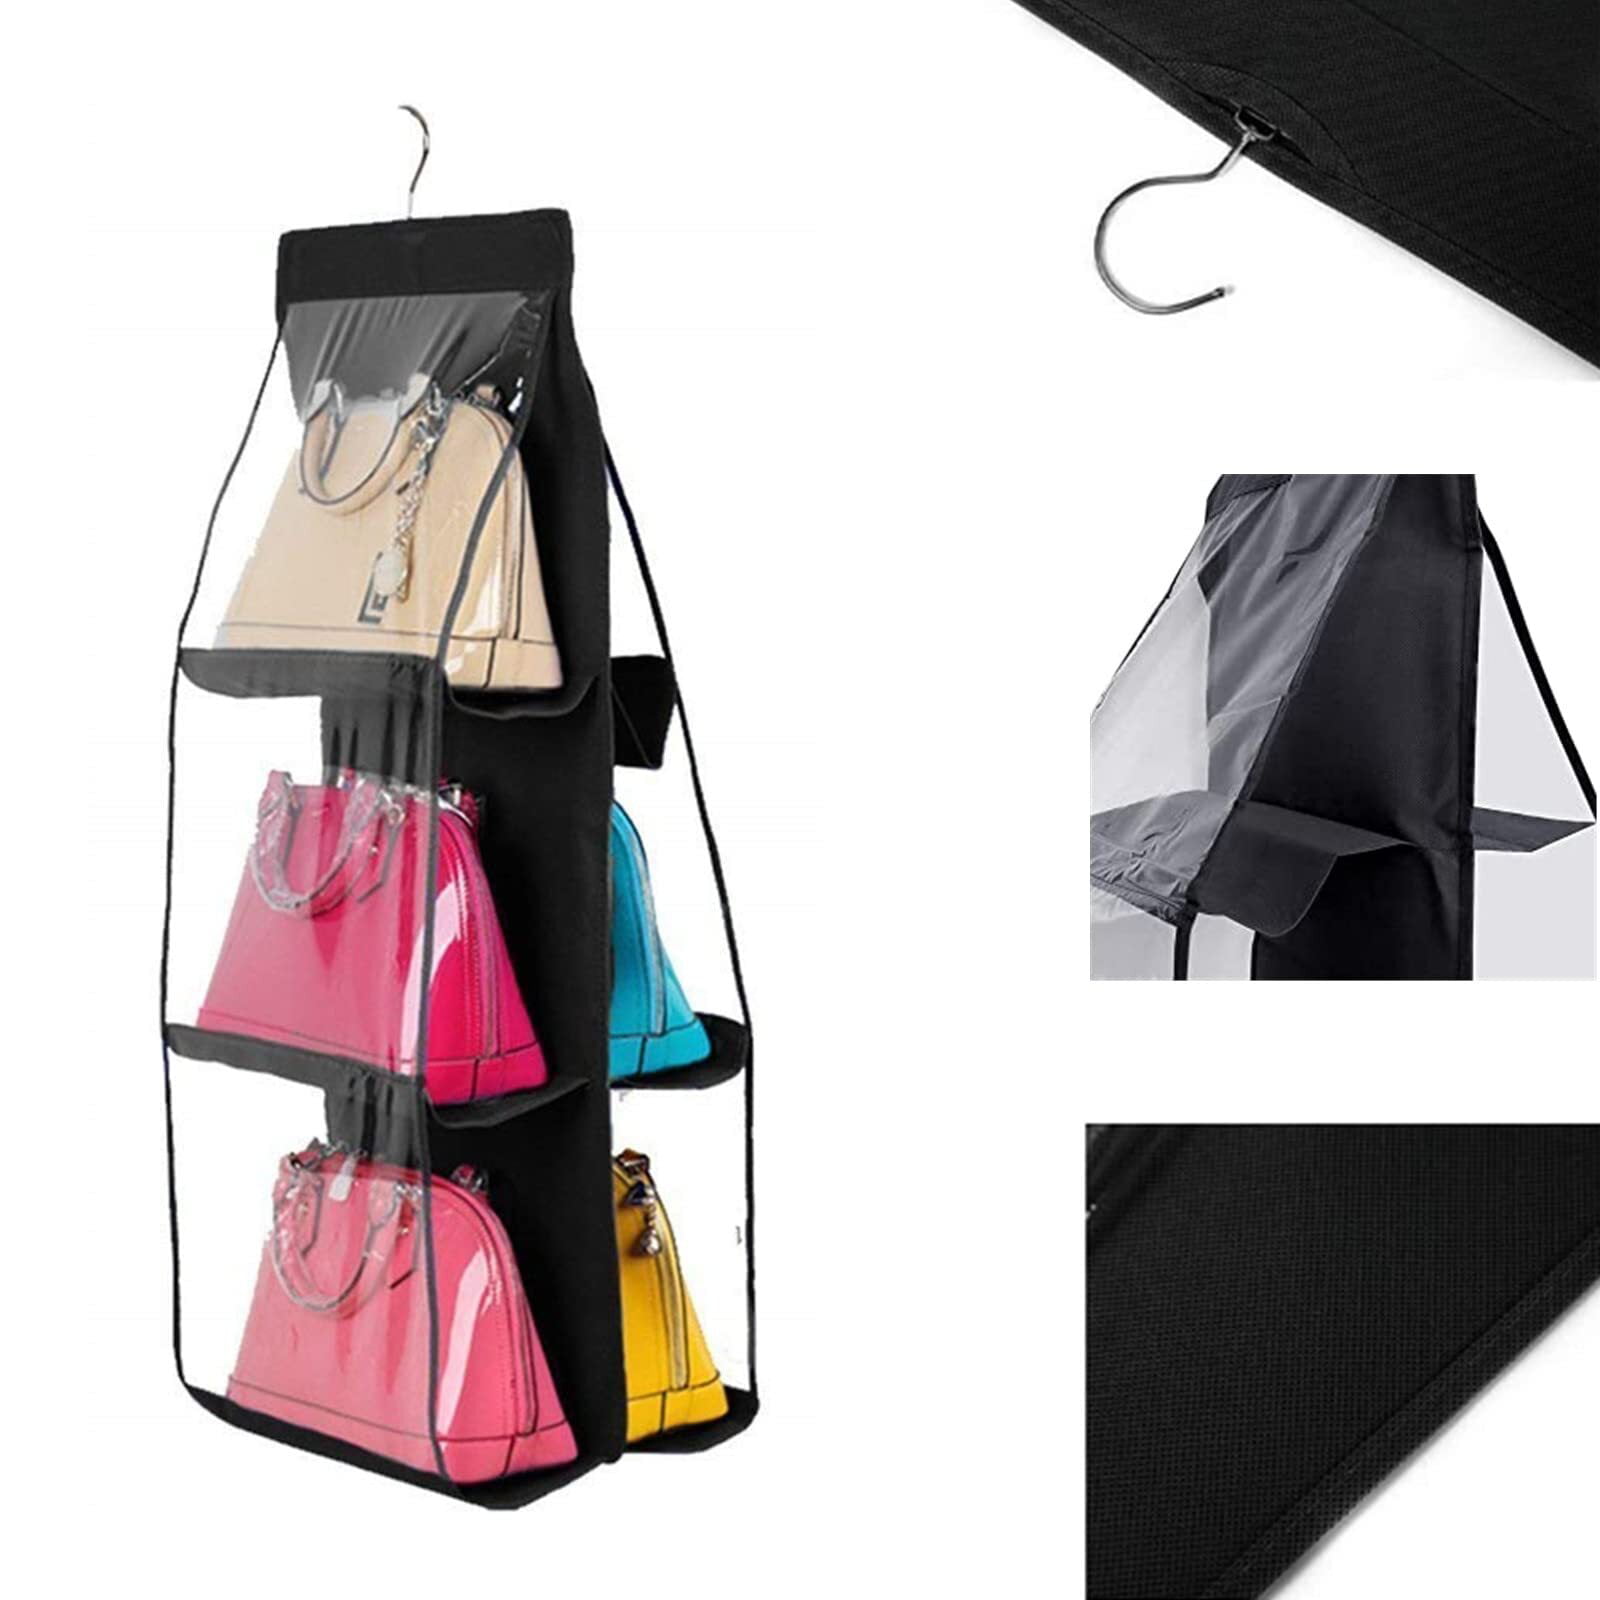 Buy Everbuy 6 Pocket Handbag Anti-dust Cover Clear Hanging Handbag Organizer  Dust-Proof Purse Clutch Storage Holder Bag Wardrobe Closet Space Saver 1  Packs HZC85 (Black,1 Pack) Online at Low Prices in India 